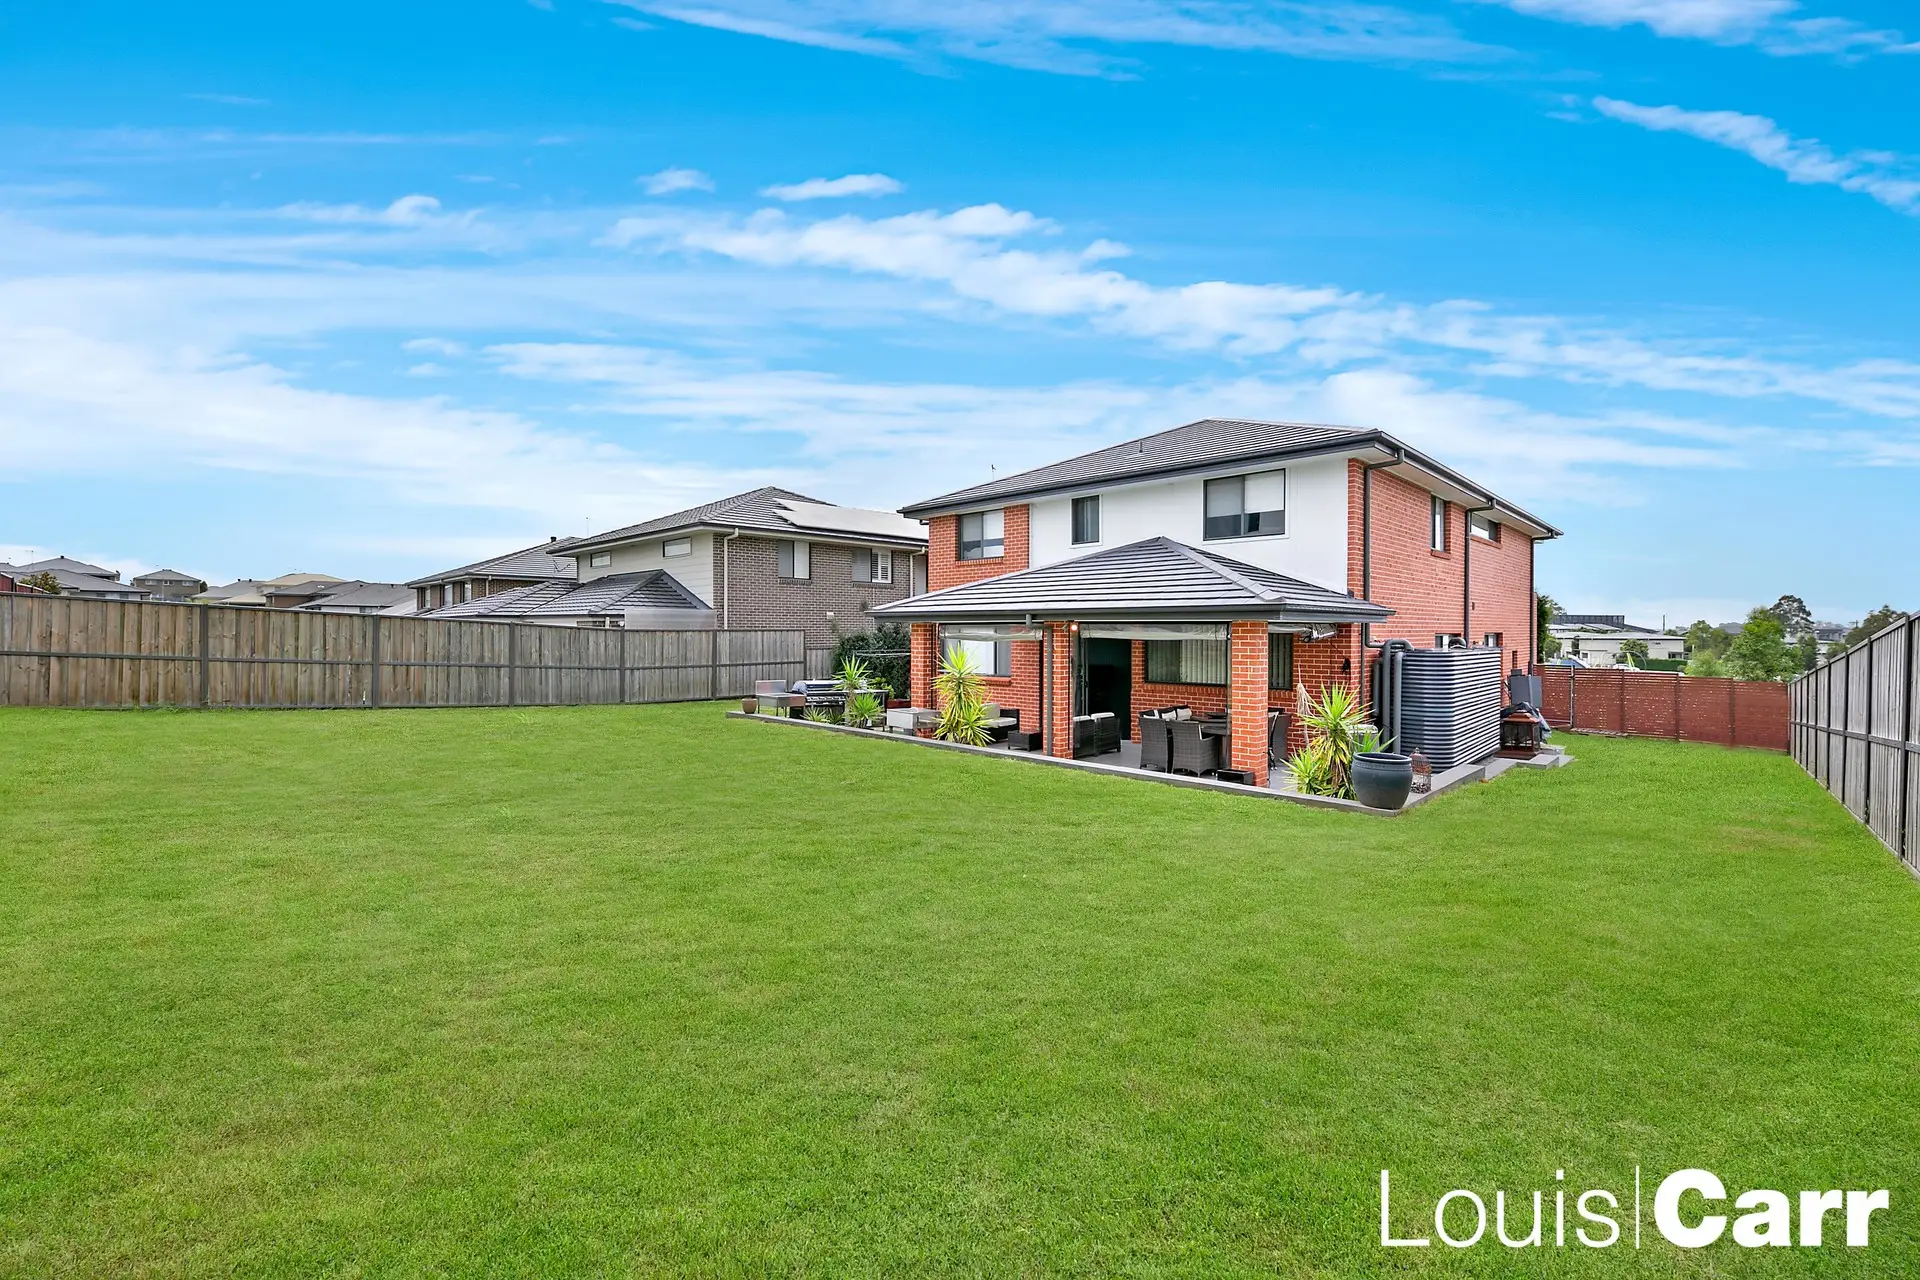 Photo #13: 17 Florence Avenue, Kellyville - Sold by Louis Carr Real Estate